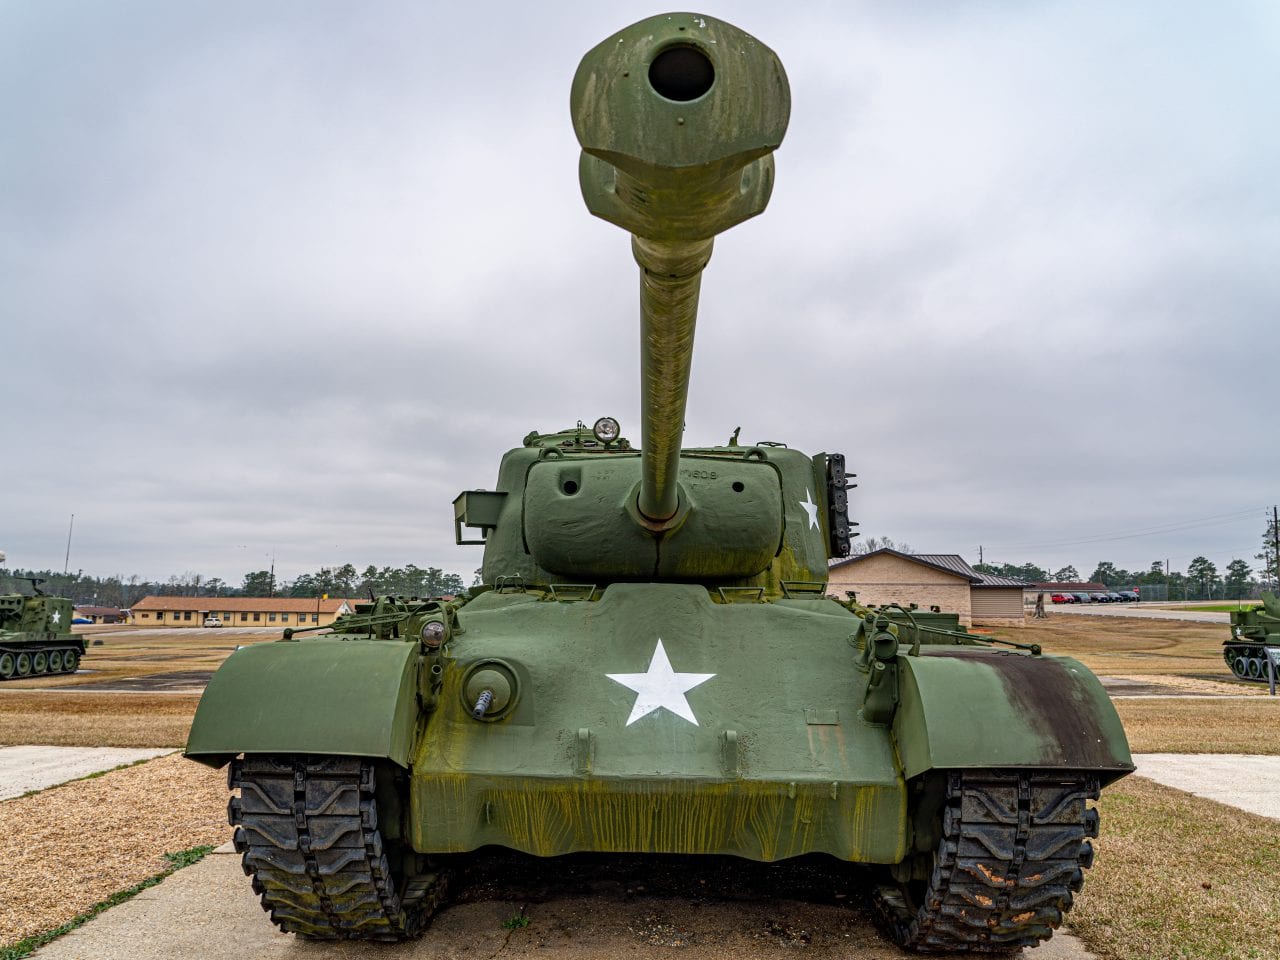 Come see a tank at the Mississippi Armed Forces Museum